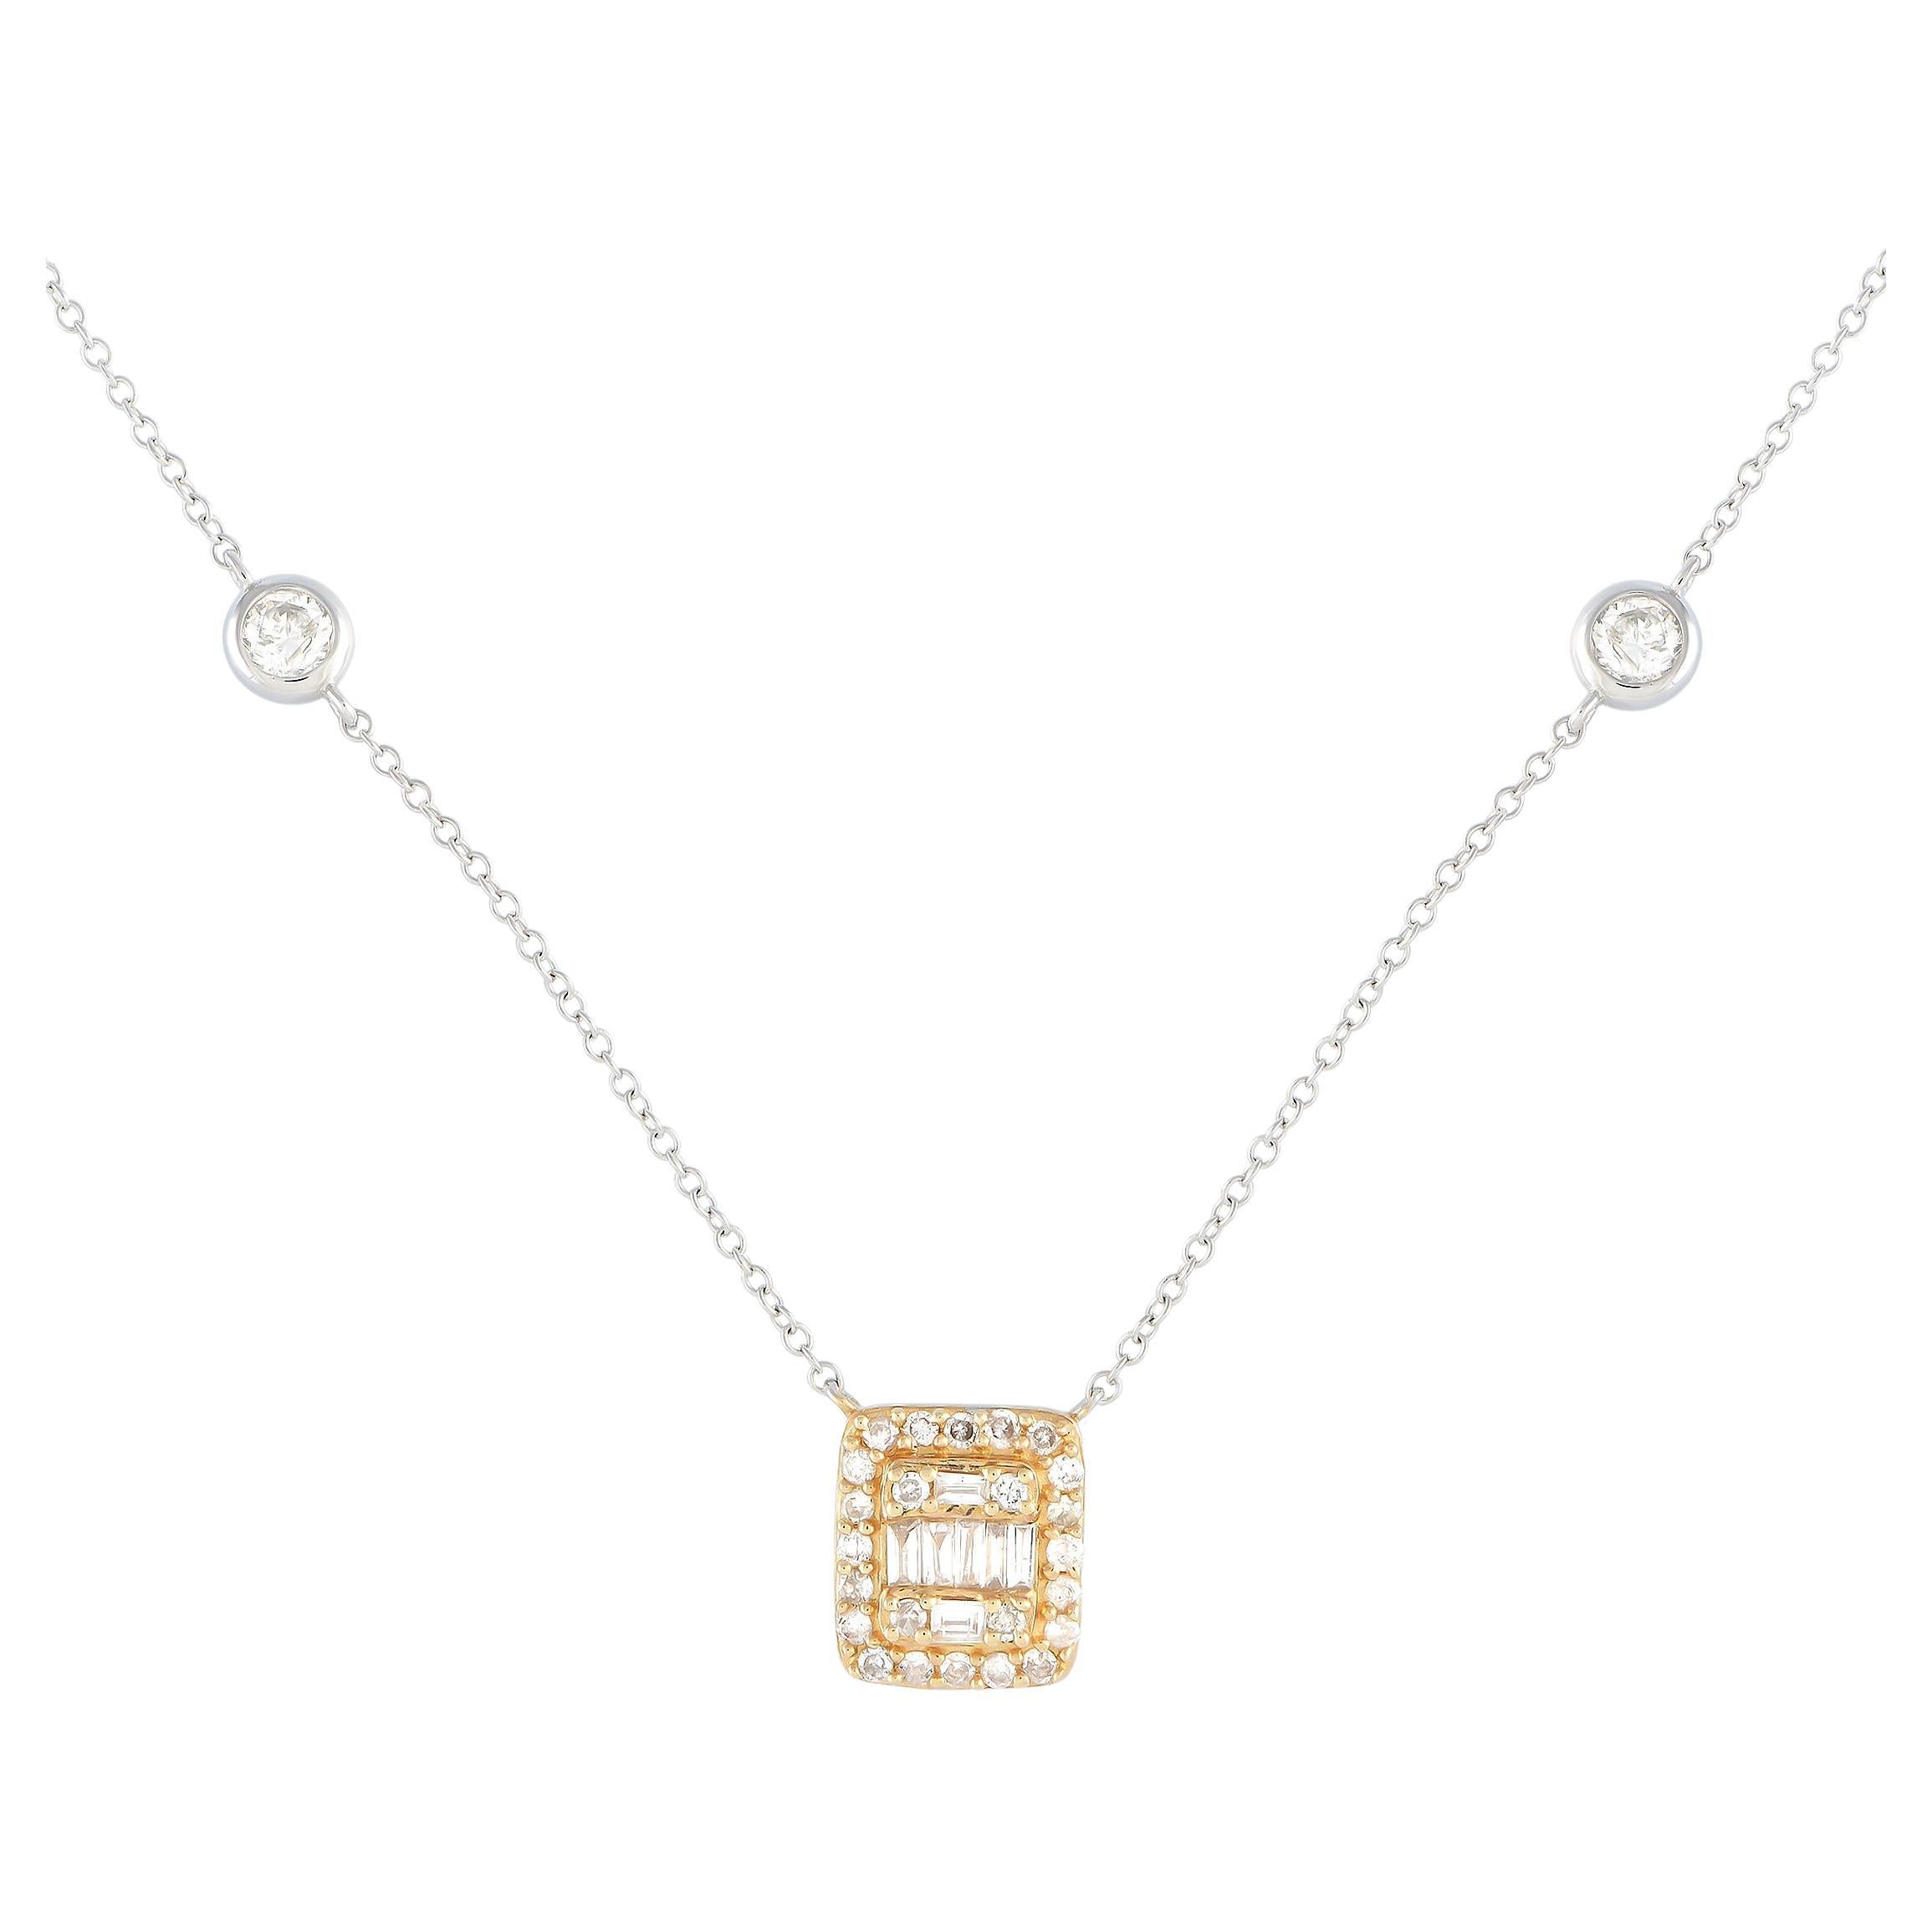 LB Exclusive 14K White and Yellow Gold 0.35ct Diamond Necklace PN14815